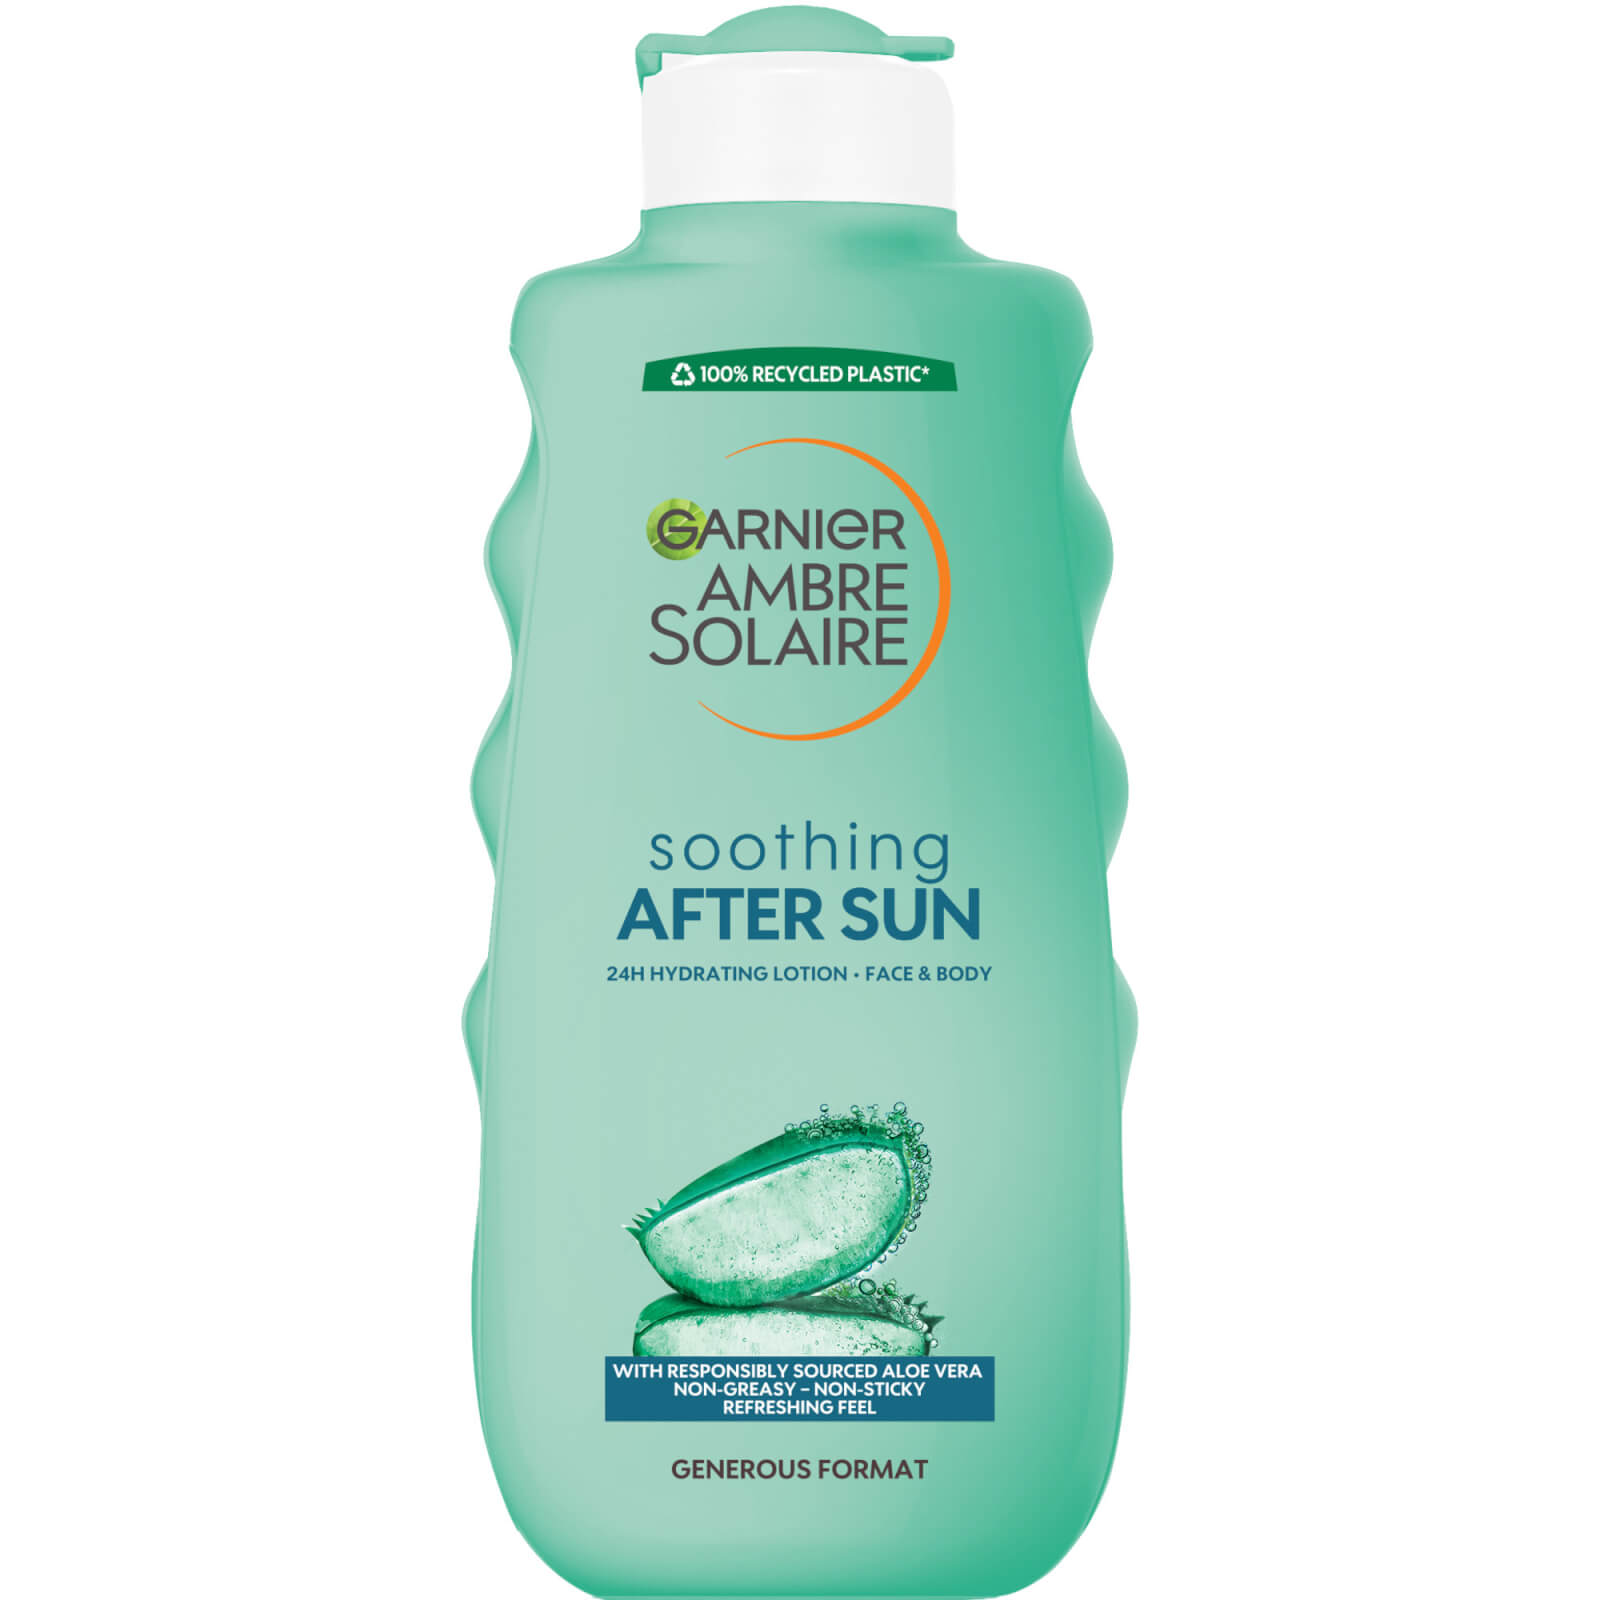 Photos - Cream / Lotion Garnier Ambre Solaire Hydrating Soothing After Sun Lotion 400ml C3647914 